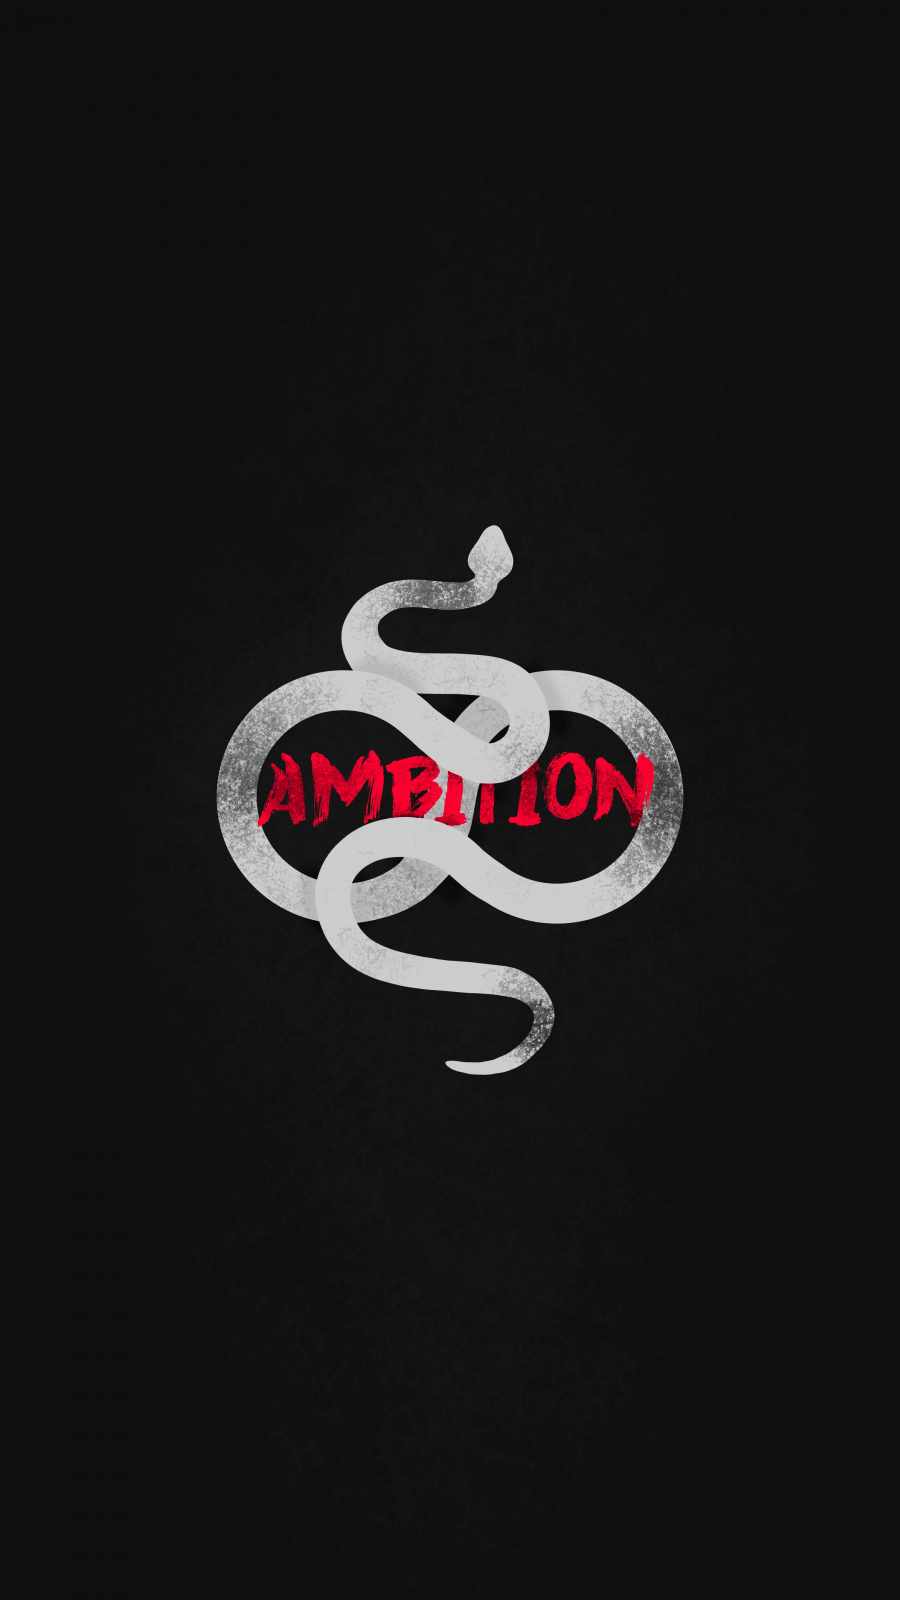 Ambition iPhone Wallpaper